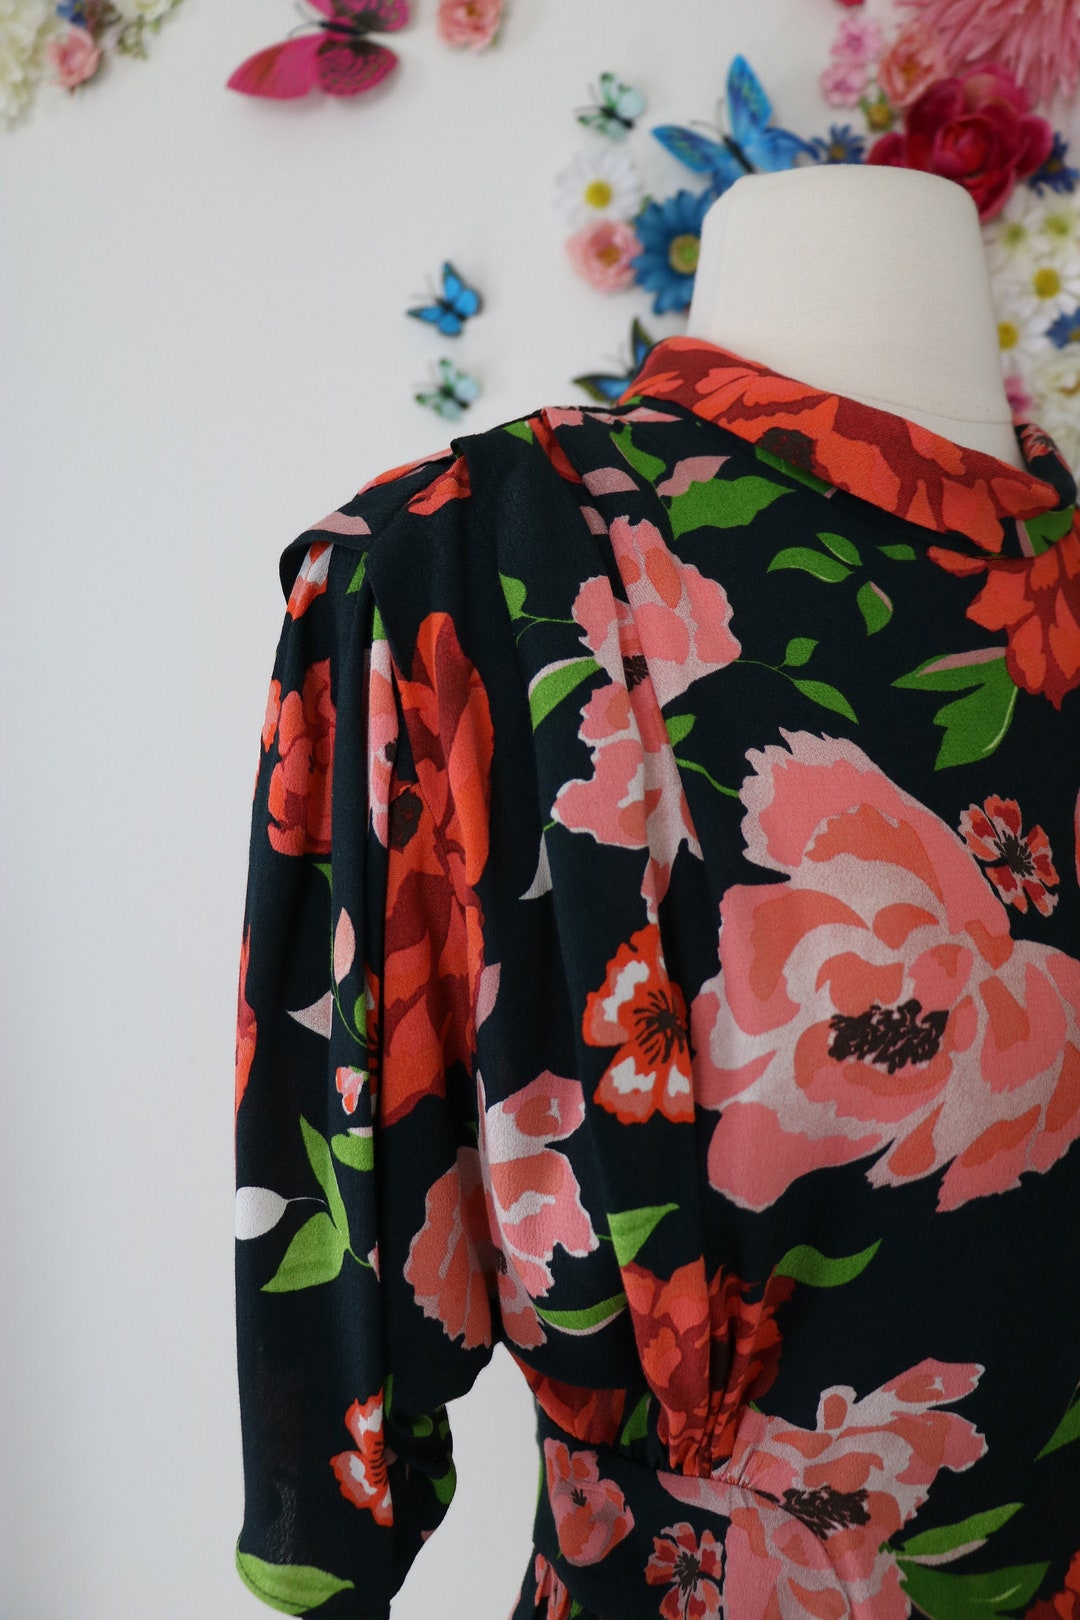 40s Style Vintage Floral Blouse Peach Black Rolled Collar - Etsy